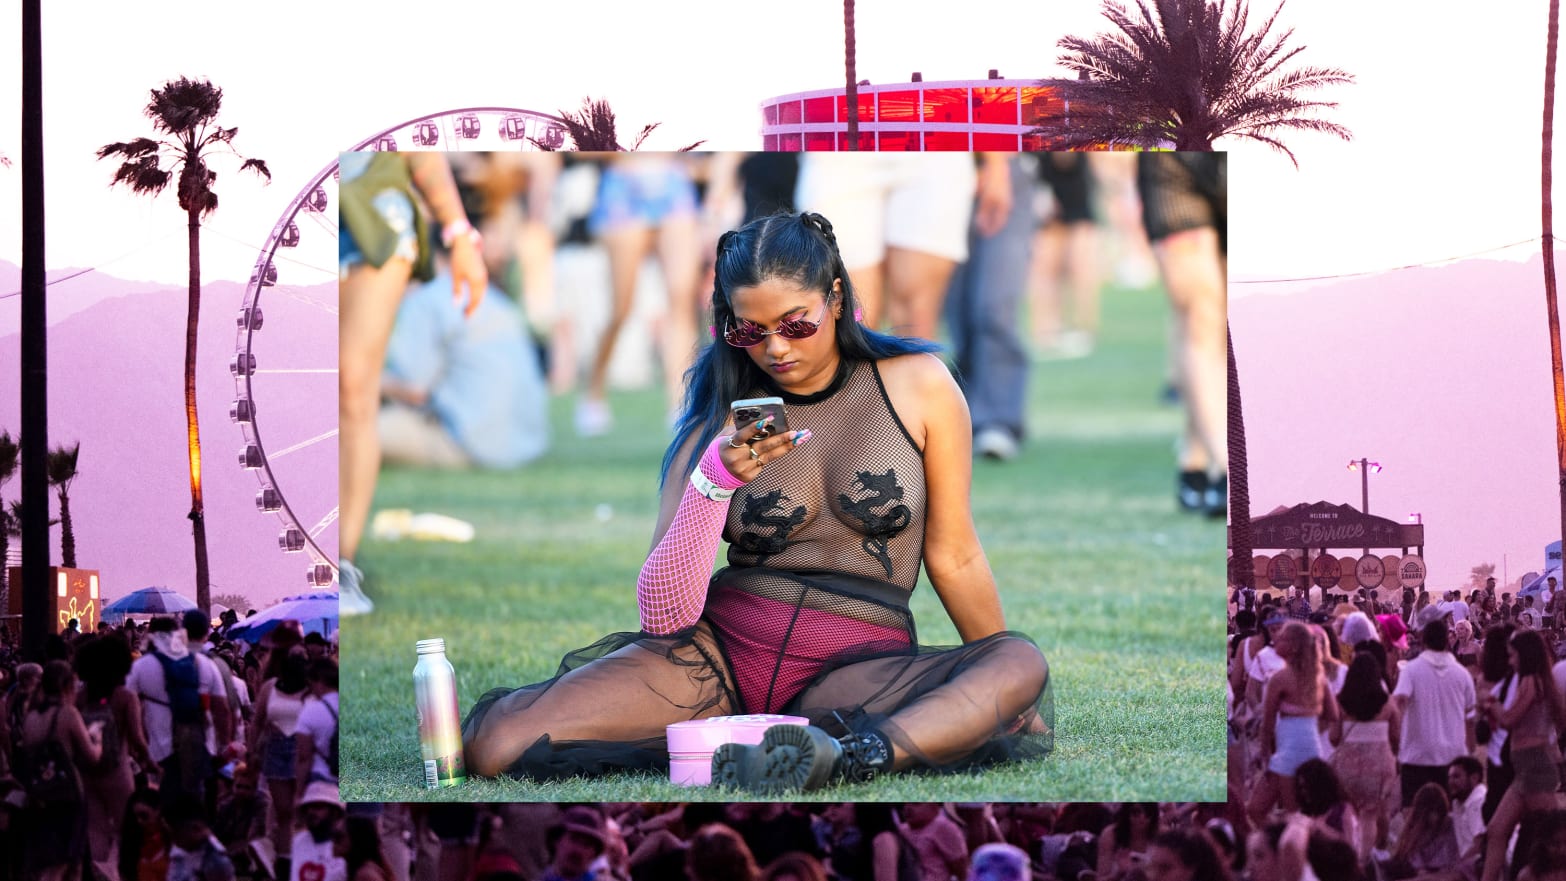 A photo illustration of a woman at Coachella sitting on the ground looking at her phone